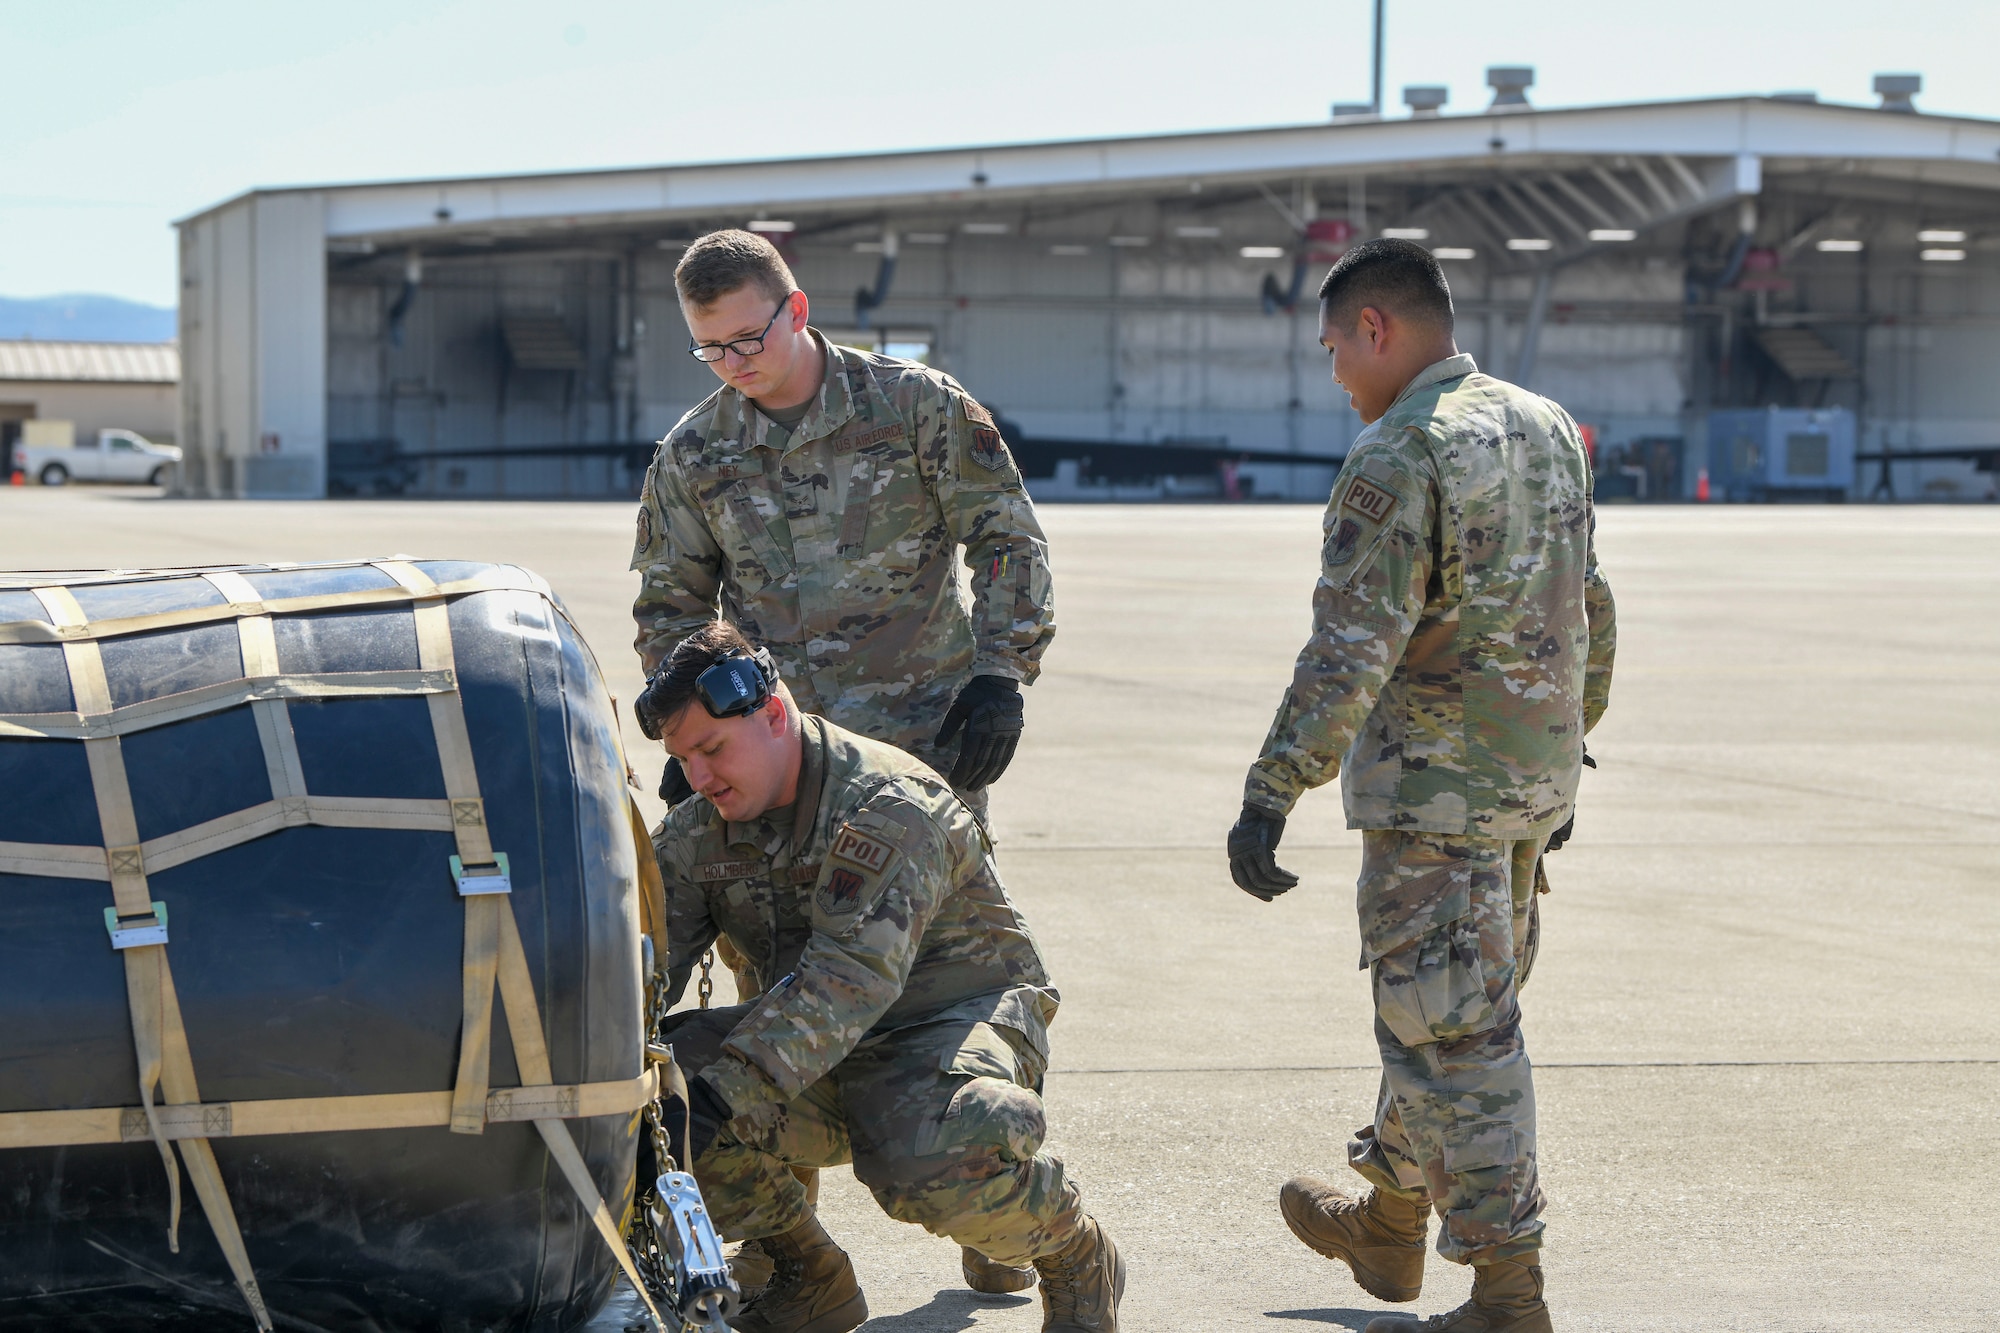 9th Logistics Readiness Squadron Immediate Response Force team members prepare to test the Tactical Aviation Ground Refueling System (TAGRS) during an exercise, July 9, 2021, at Beale Air Force Base, California.